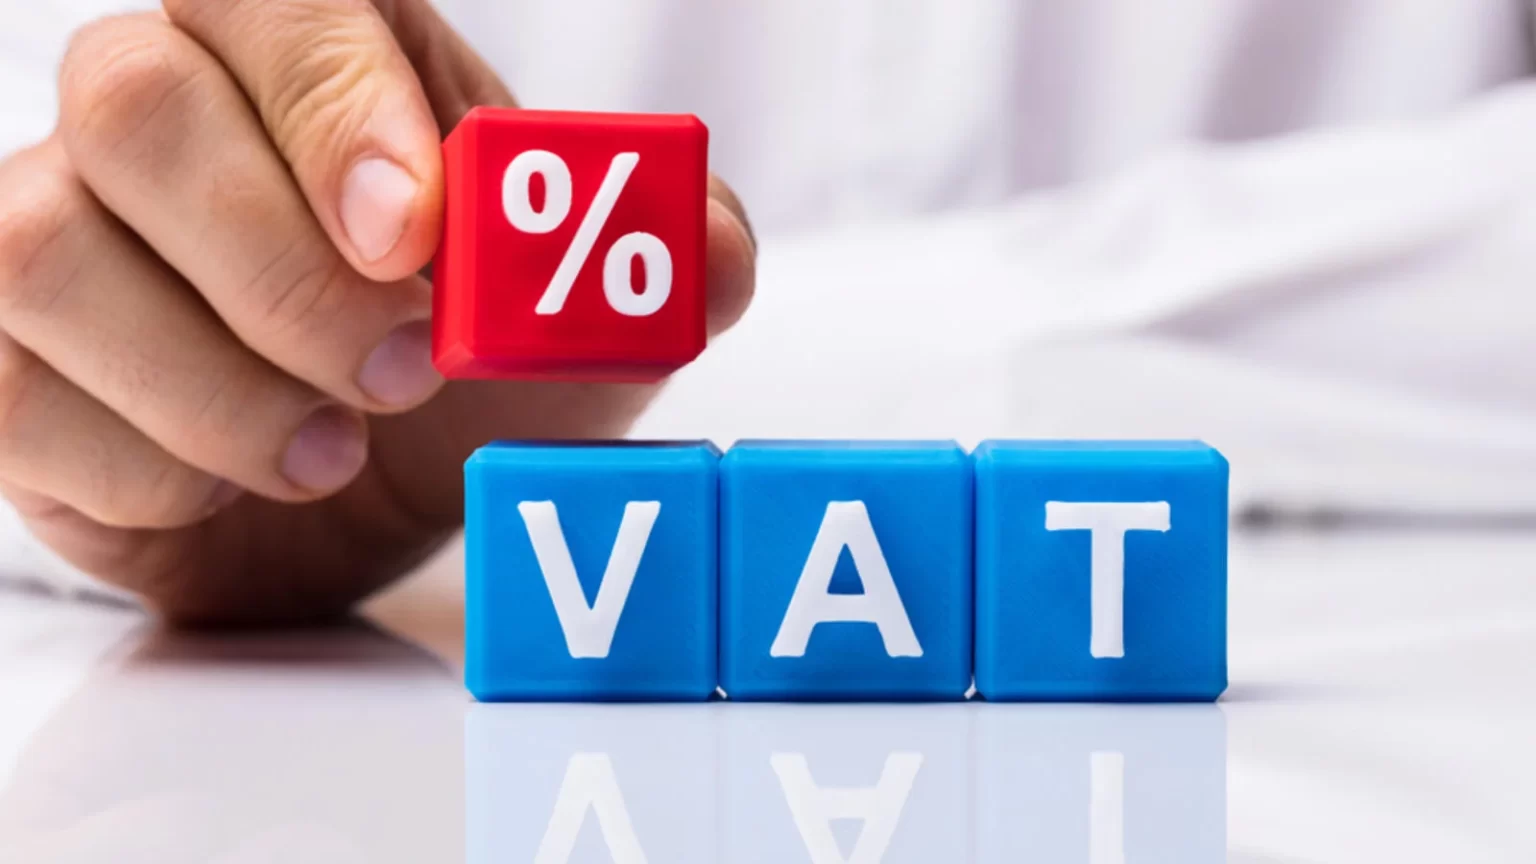 i0 wp com VAT 1536x864 - How to calculate VAT in the UK